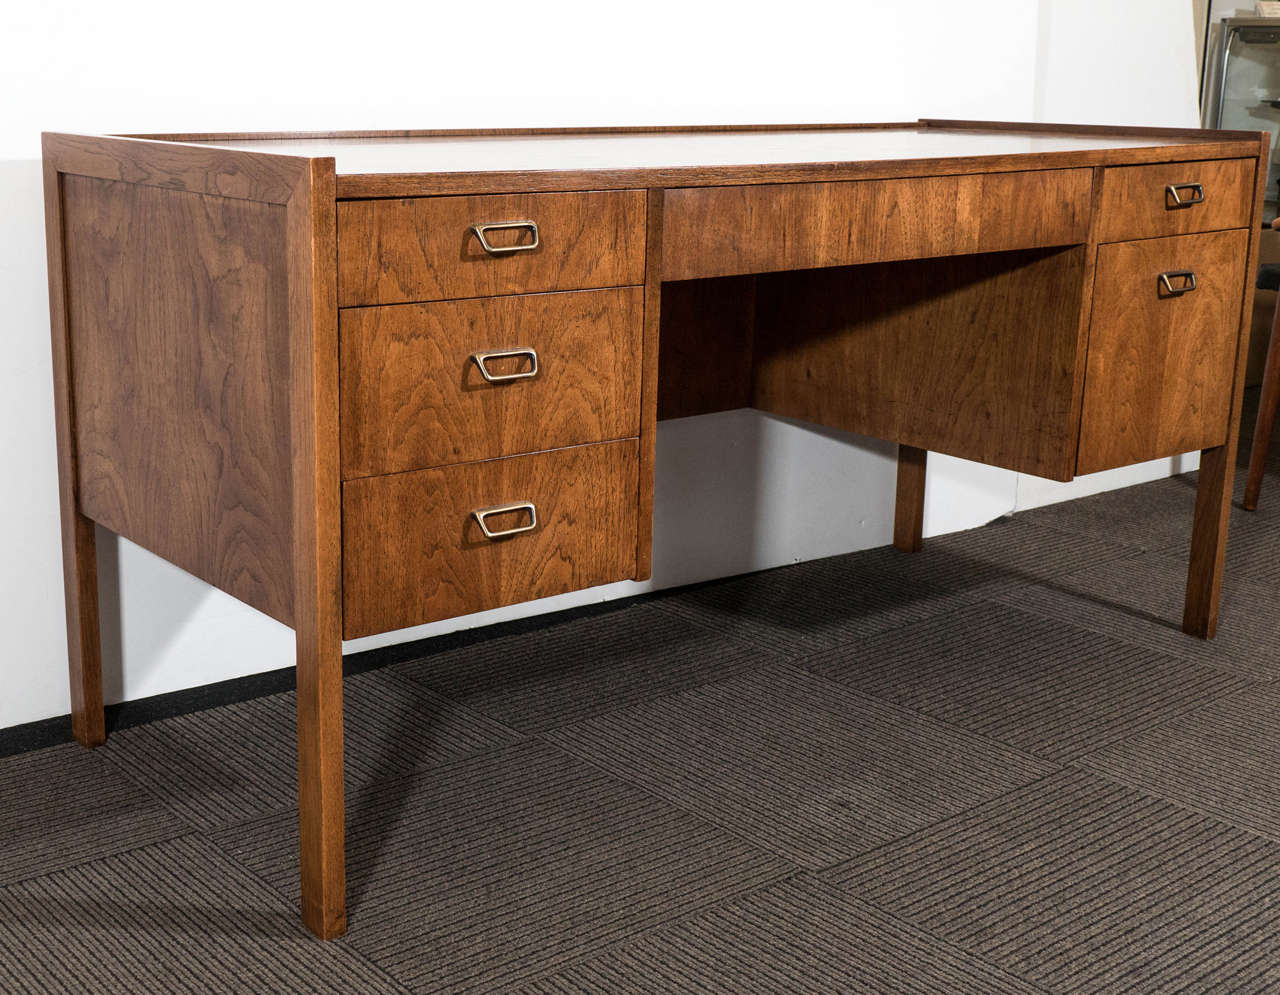 A vintage six-drawer modern executive desk by Founders Furniture Company, produced circa 1960s-1970s, veneered in walnut with square brass handles. Good vintage condition, with some age appropriate wear.